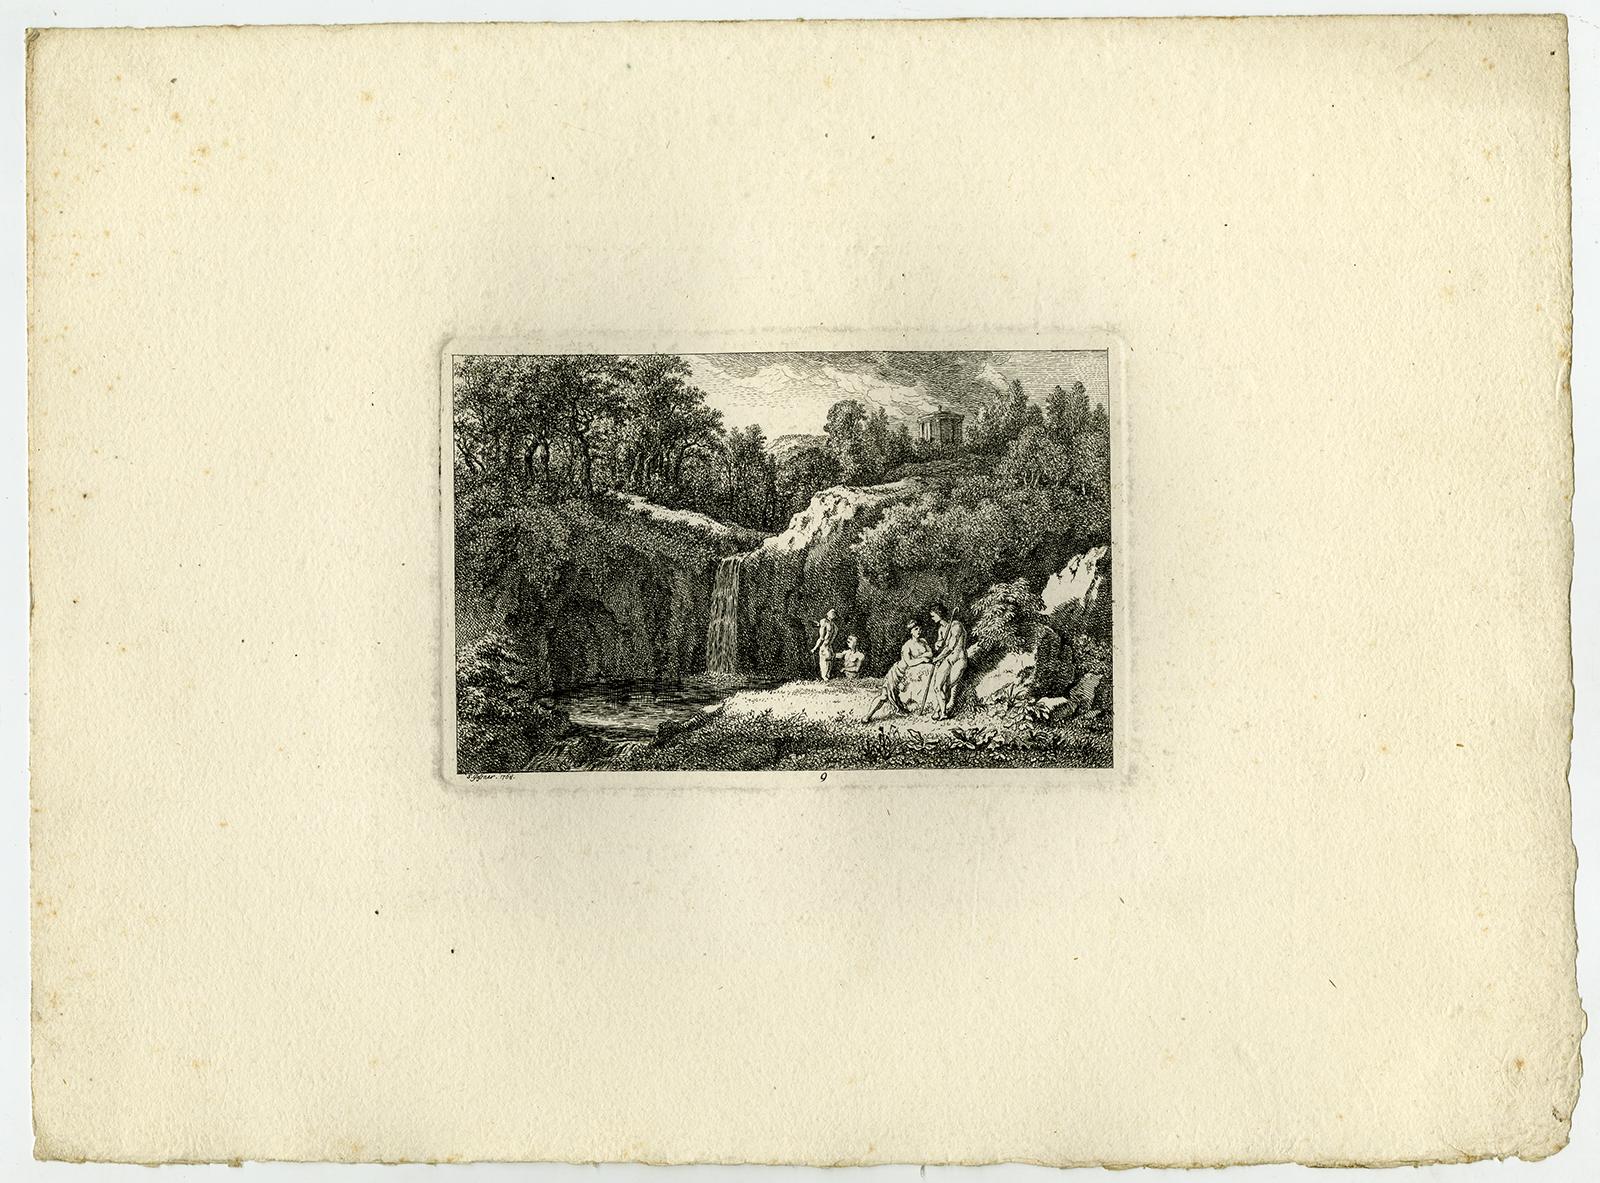 Subject:  Antique Master Print, untitled.  - Arcadian landscape with people near a waterfall and a temple on the hill.

Description:  From a set with landscapes in the 'antique' taste. . Ref: L/E 19.

Artists and Engravers:  Made by 'Salomon